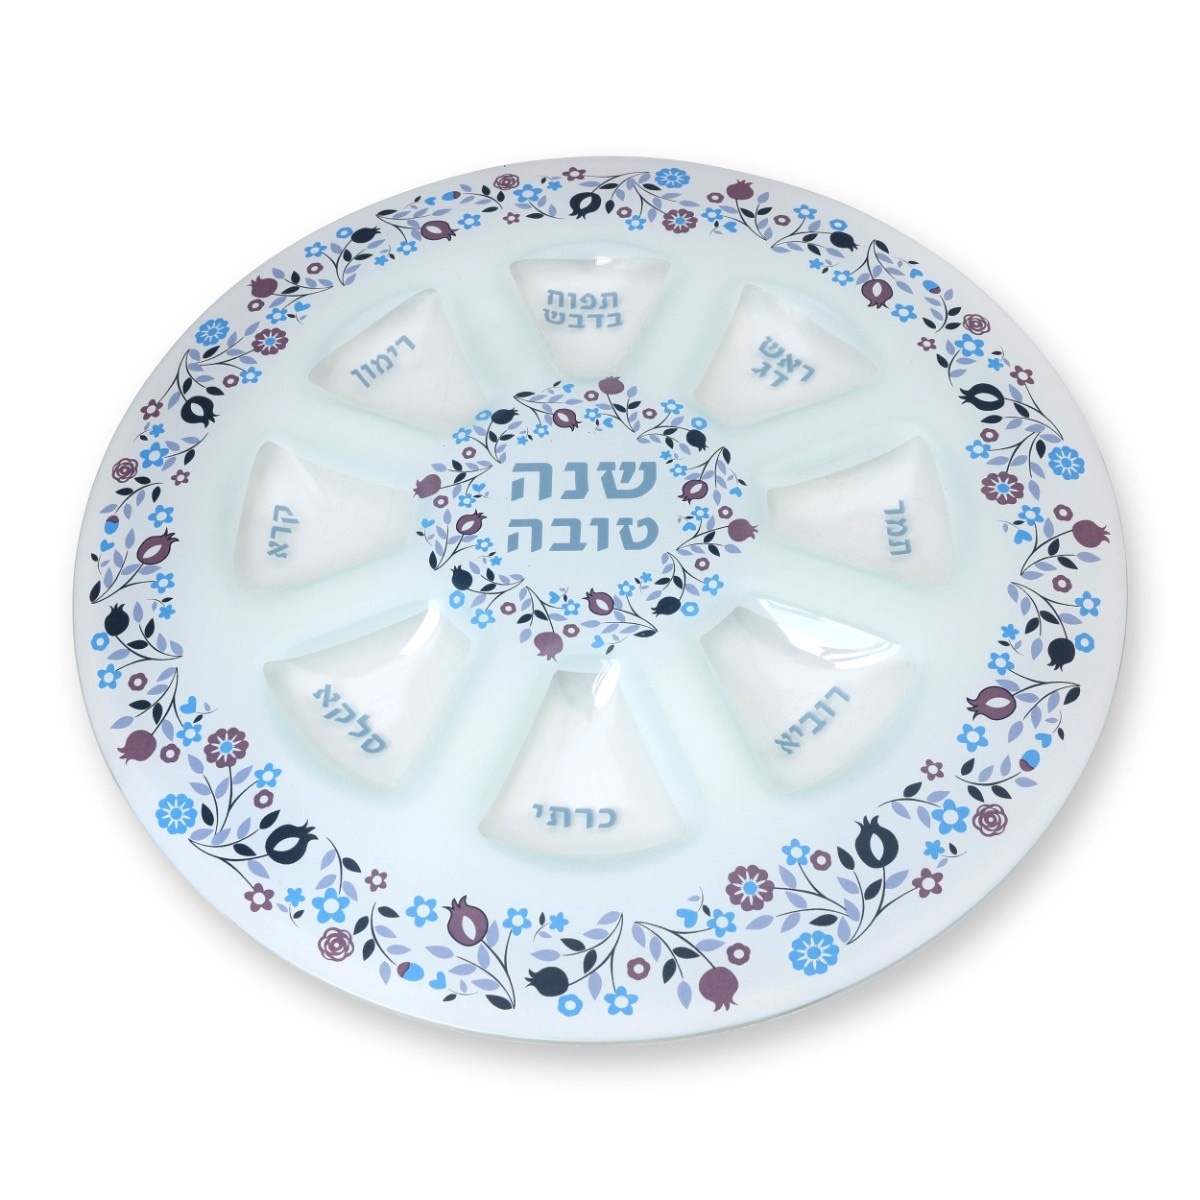 Glass Rosh Hashanah Seder Plate with Floral and Pomegranate Design - 1